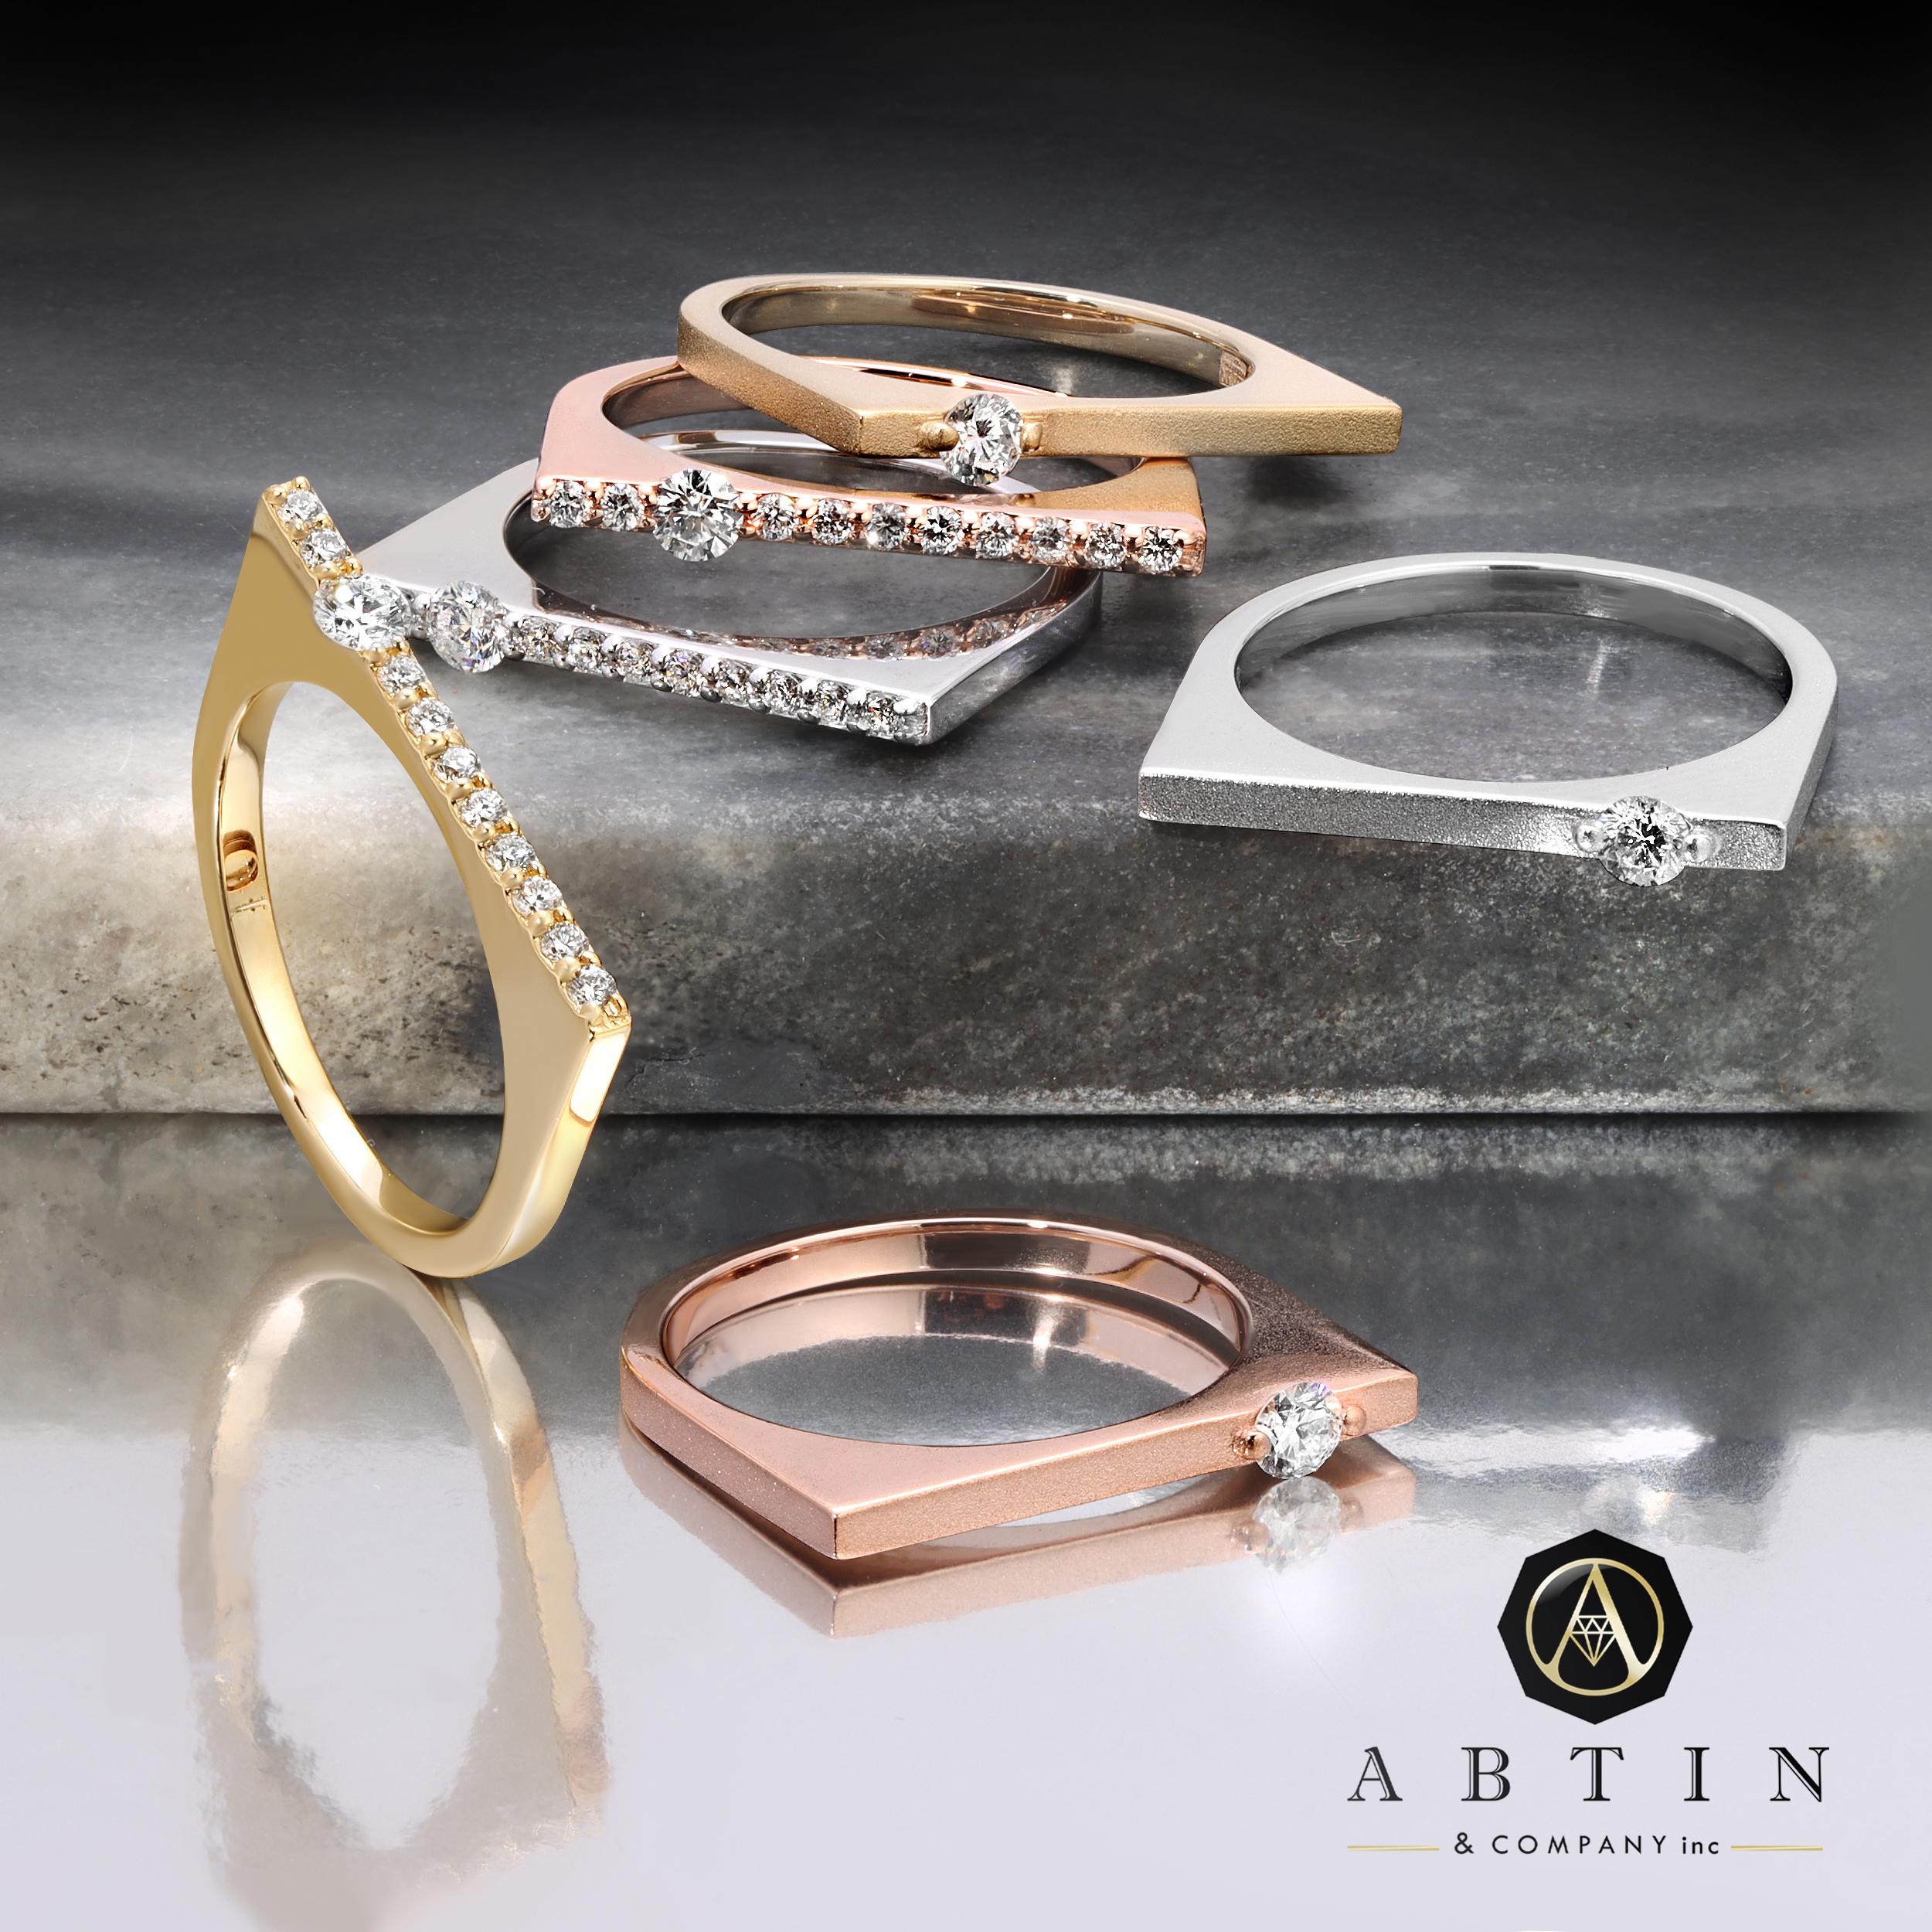 A timeless and classic bar ring crafted from 14k solid gold, featuring  round glistening diamonds adorning the gold bar. Ideal for wearing alone or stacking with other rings. Available in yellow, white, or rose gold.
Gold Weight: 3.20 gr.
Diamond